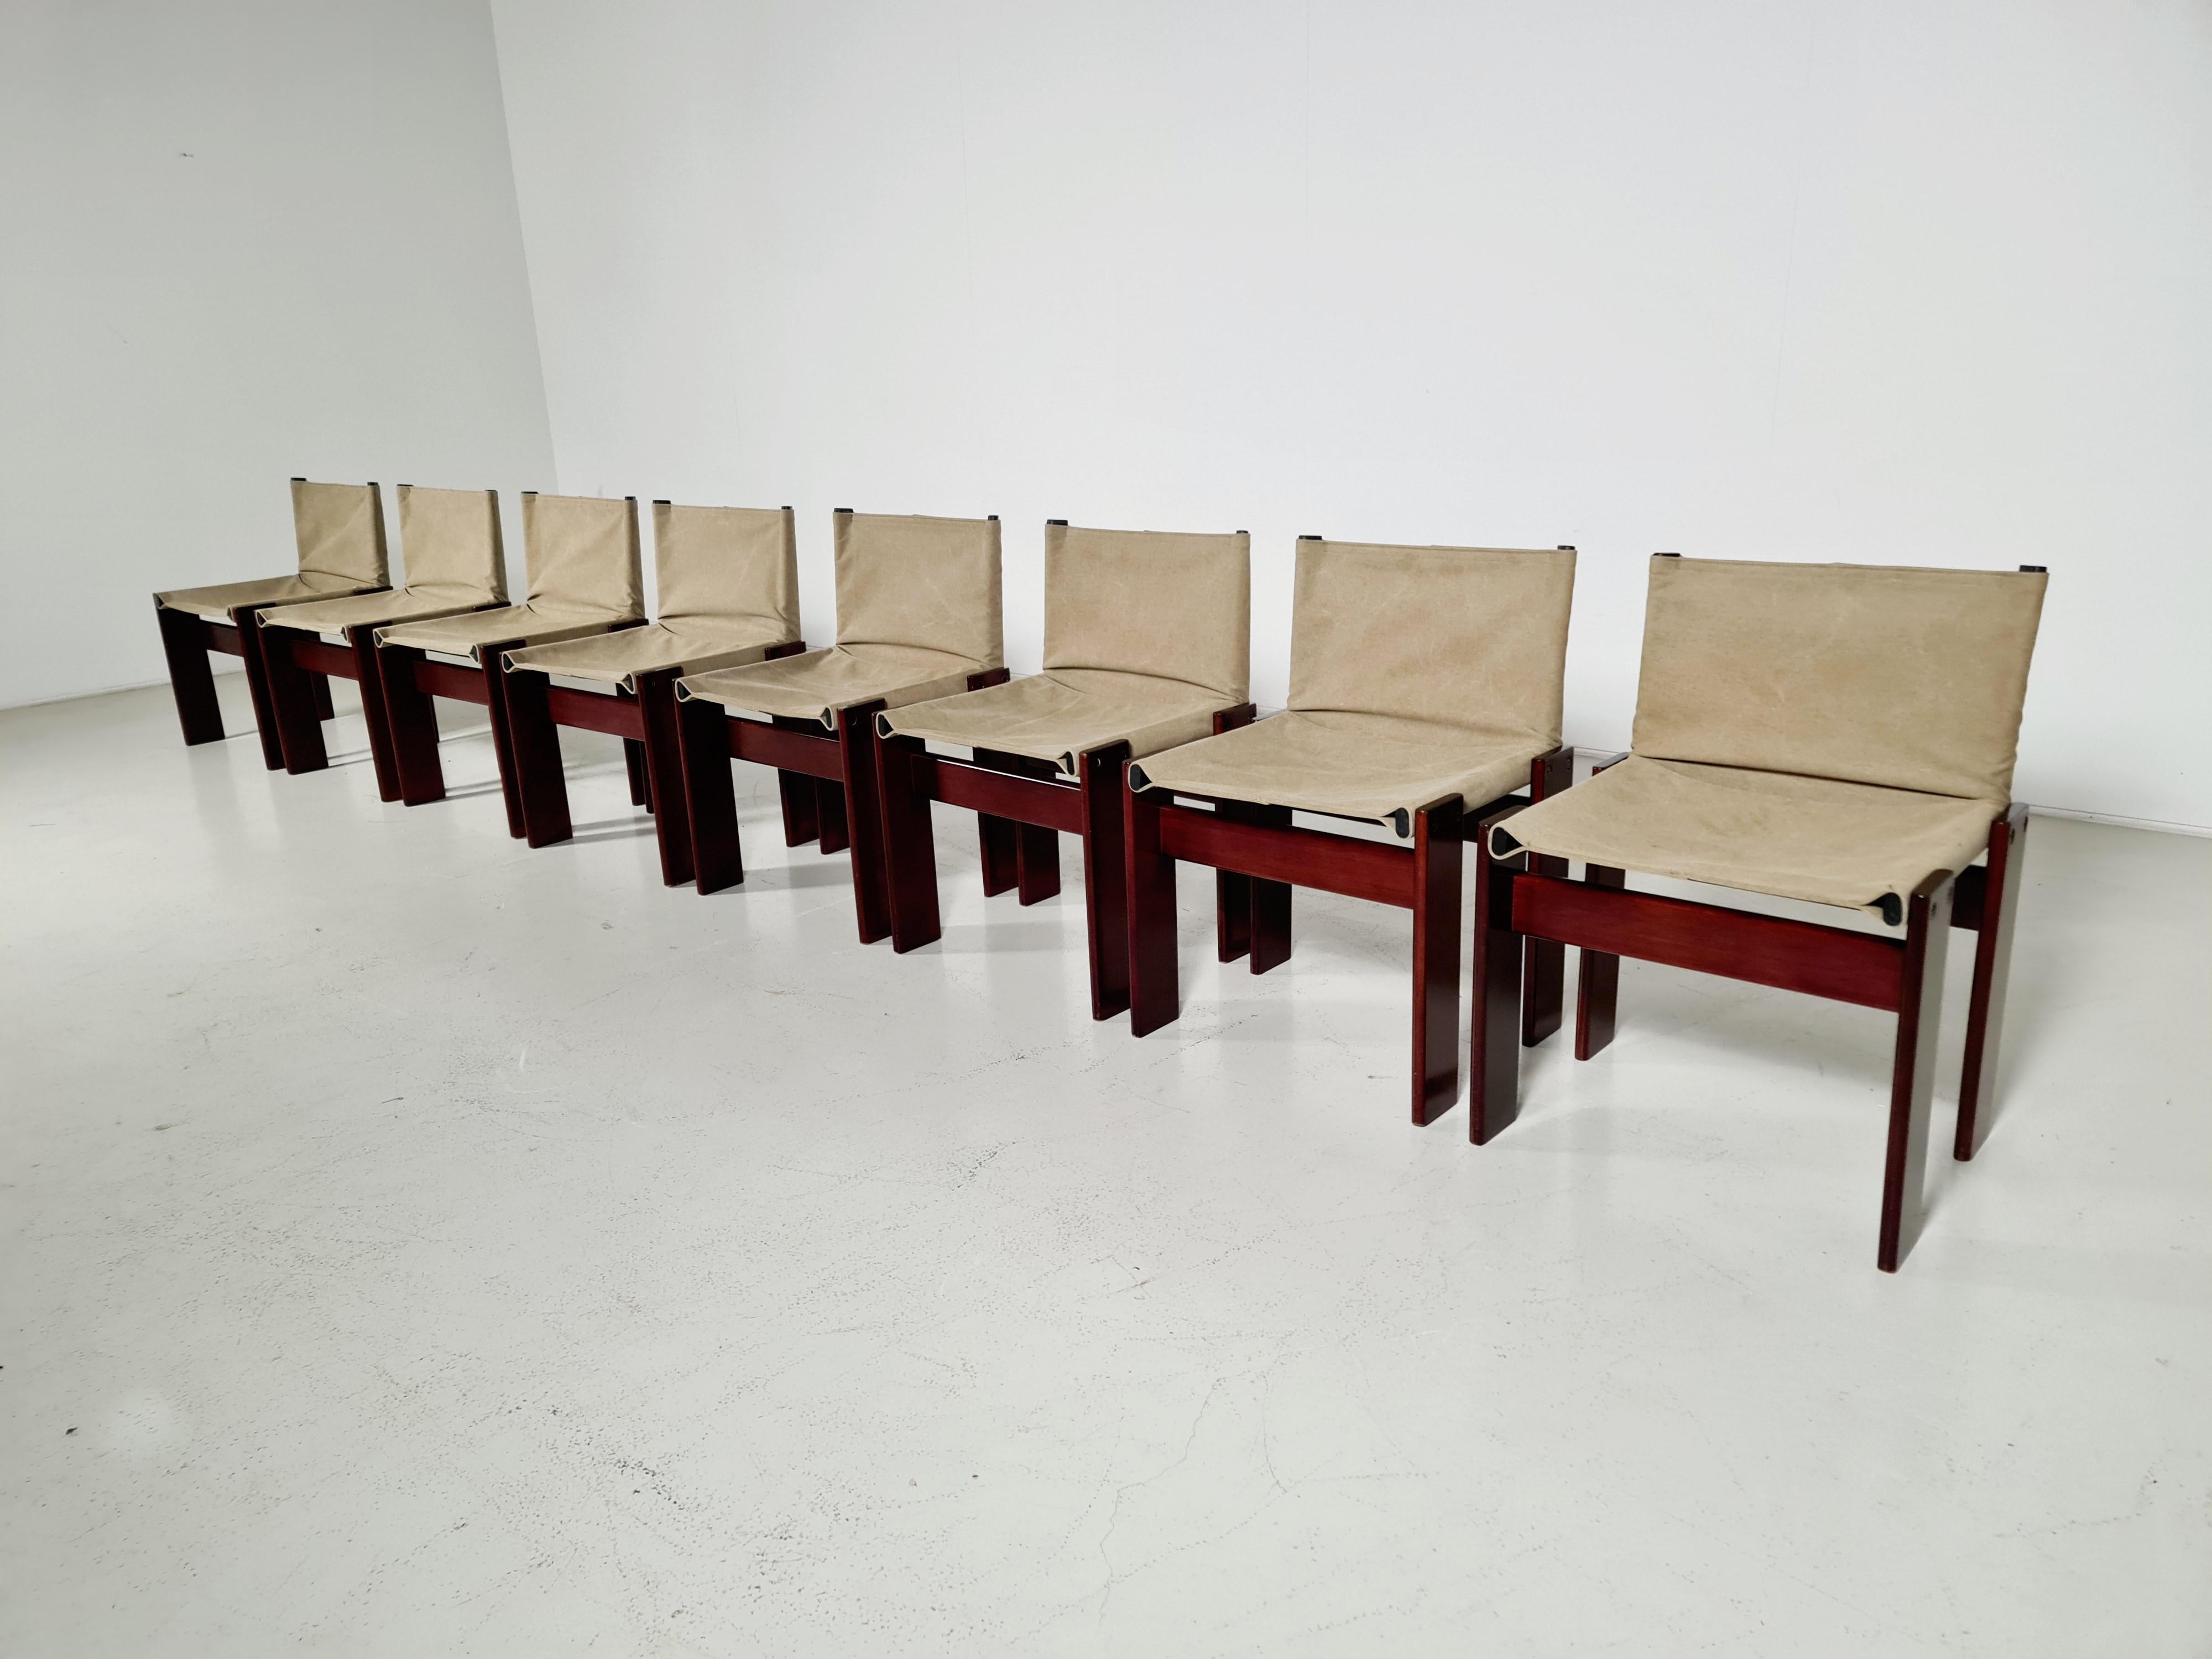 European Afra & Tobia Scarpa Set of 8 'Monk' Dining Chairs, 1970s